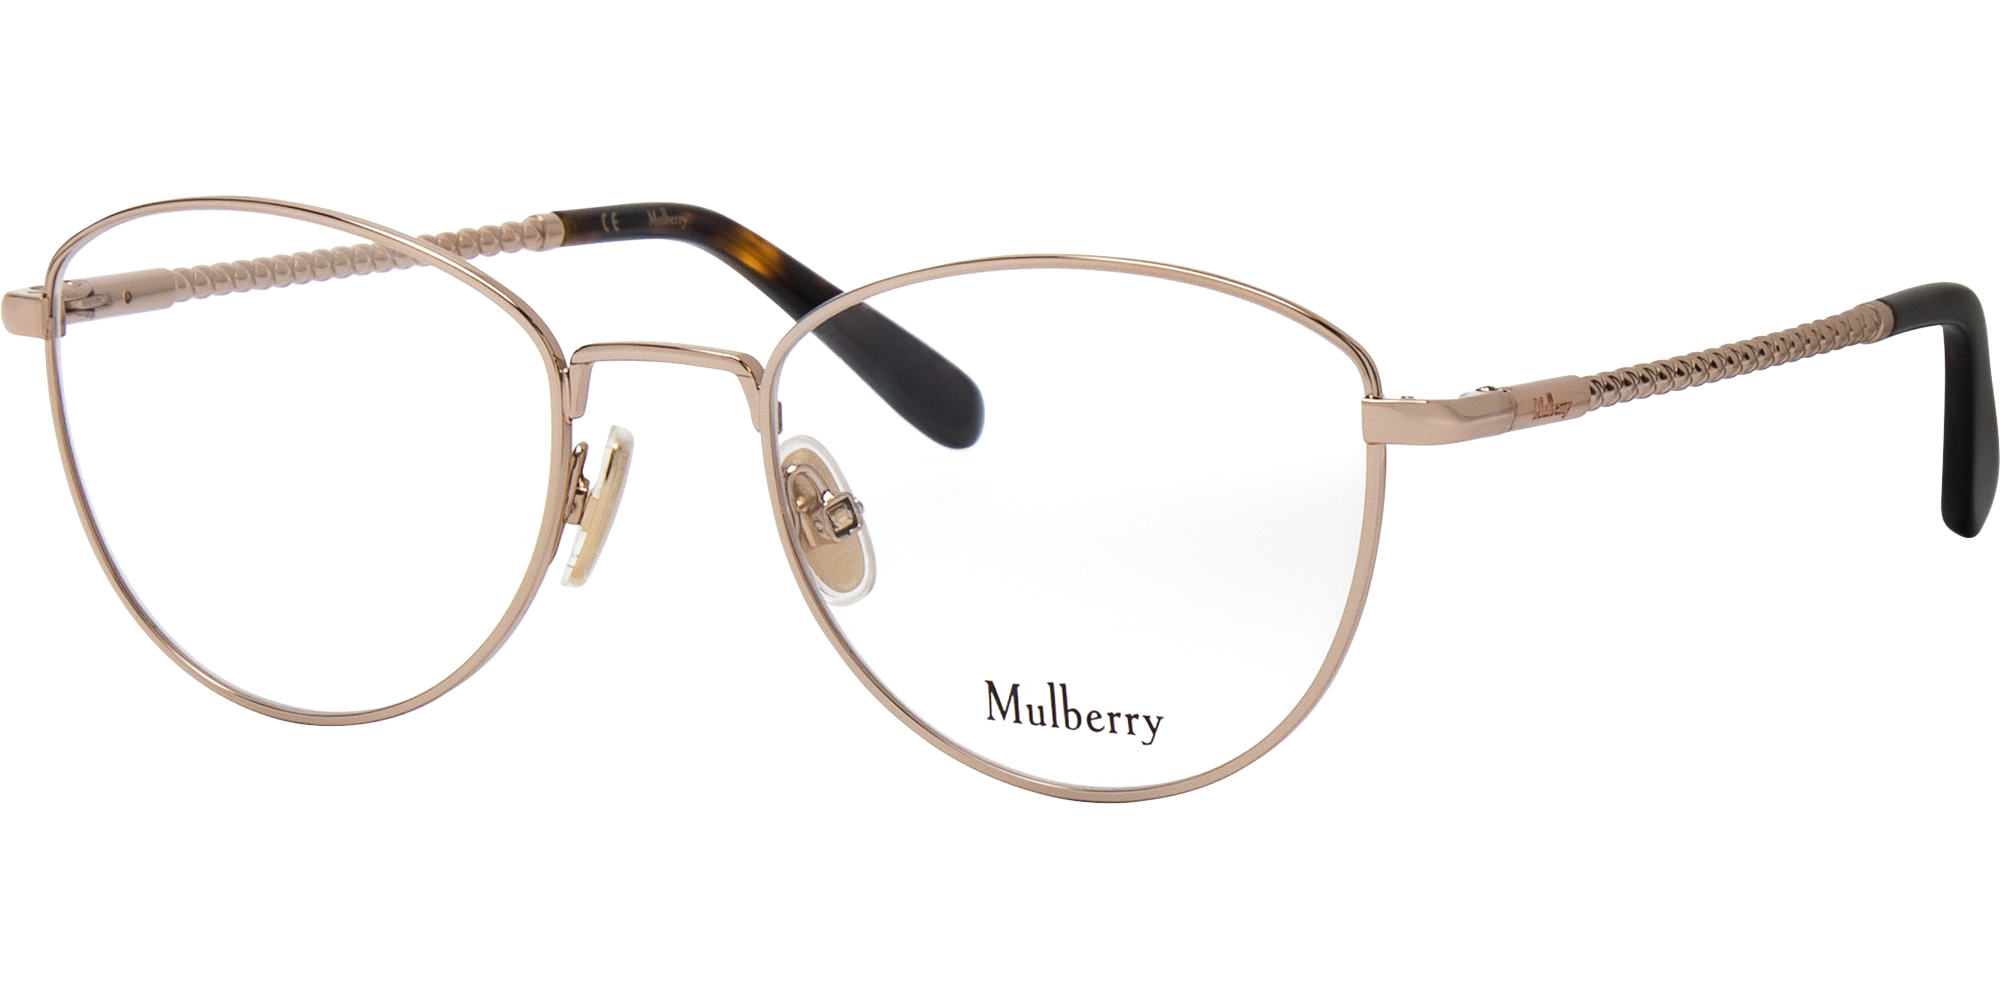 Mulberry VML127 image number null